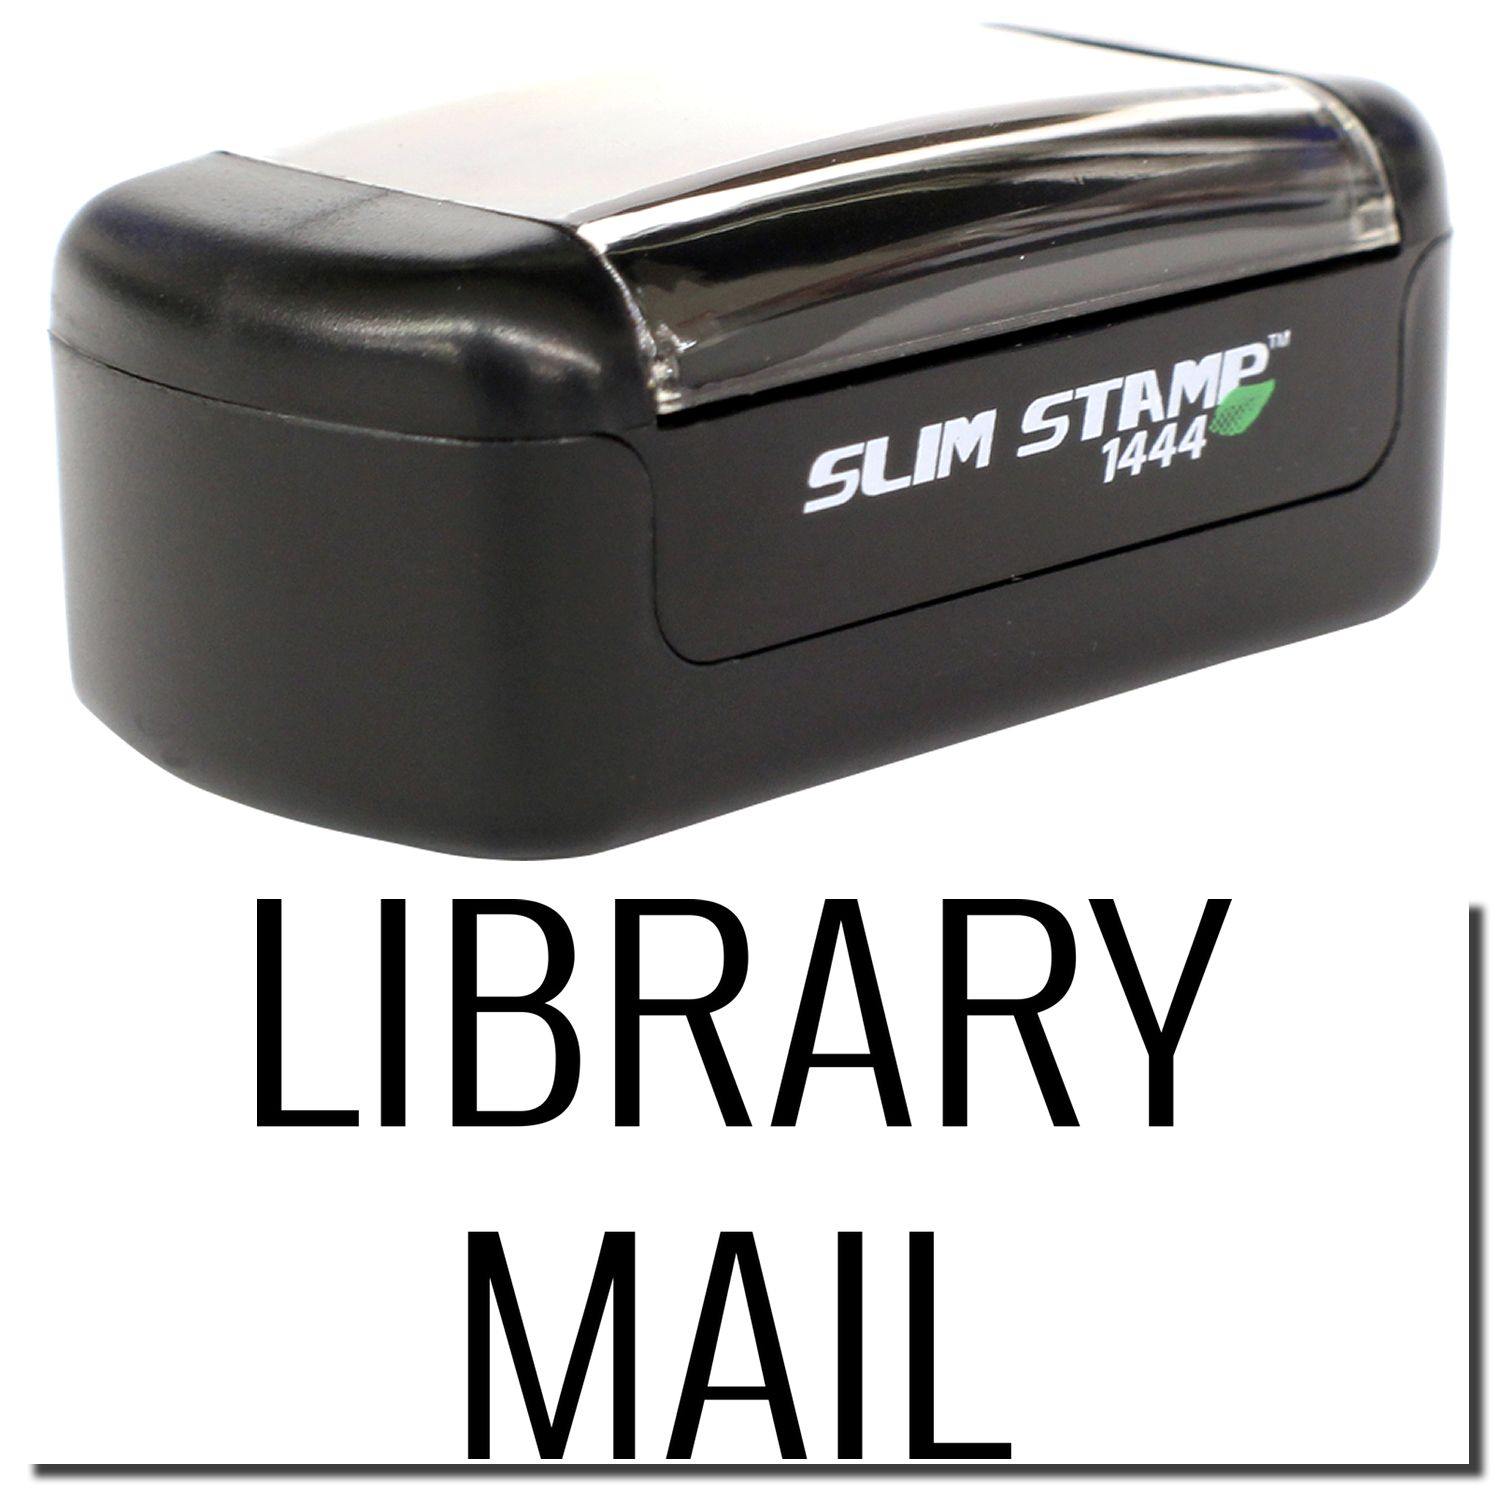 A stock office pre-inked stamp with a stamped image showing how the text "LIBRARY MAIL" is displayed after stamping.